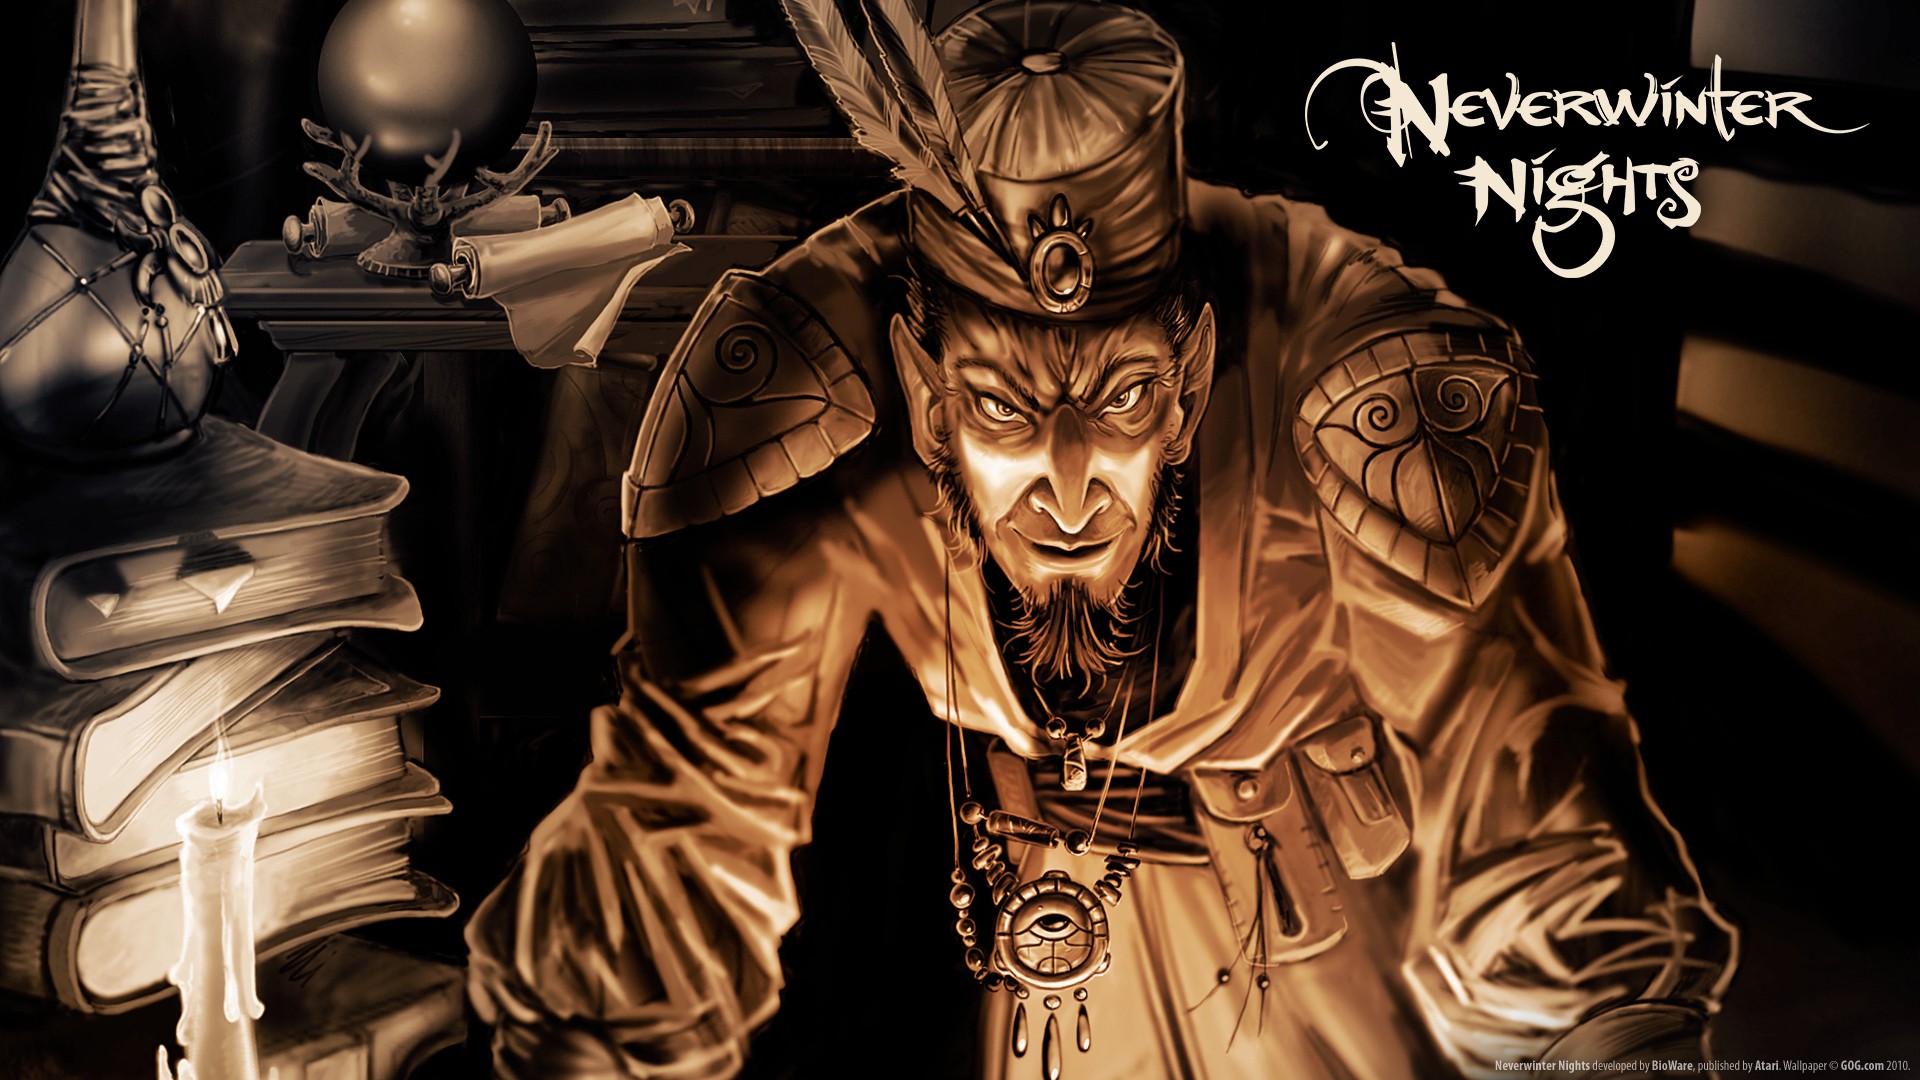 General 1920x1080 Neverwinter Nights video games PC gaming frontal view RPG